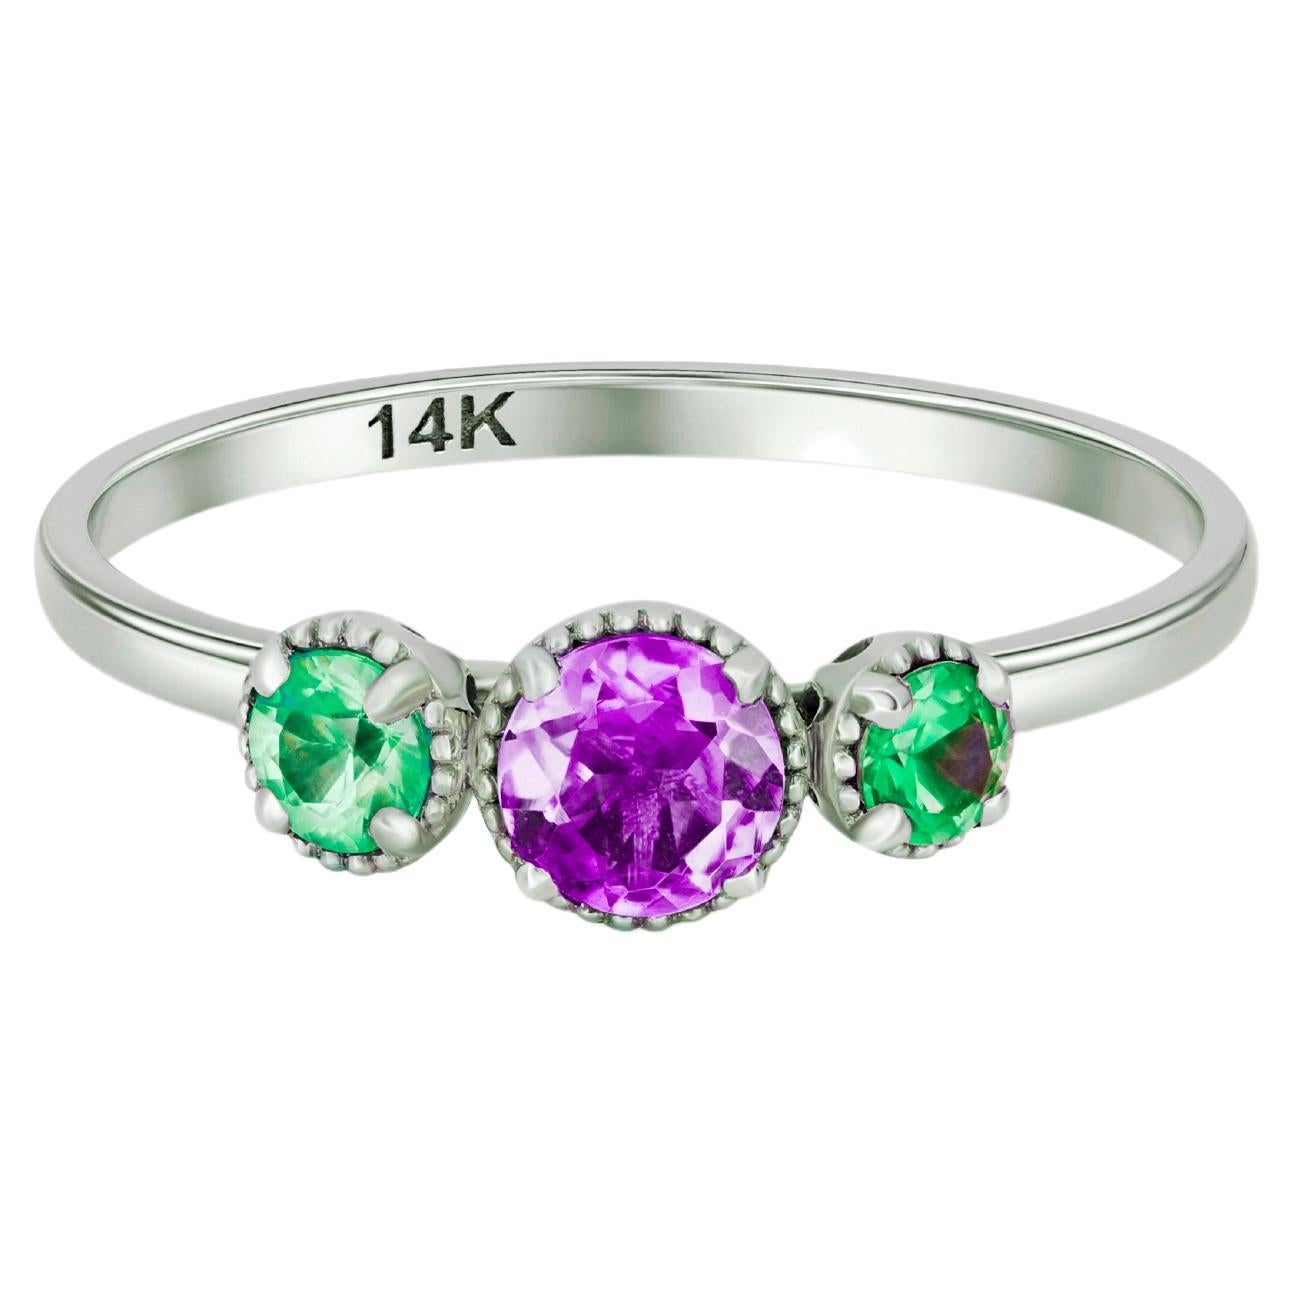 Green and purple gem 14k gold ring. For Sale